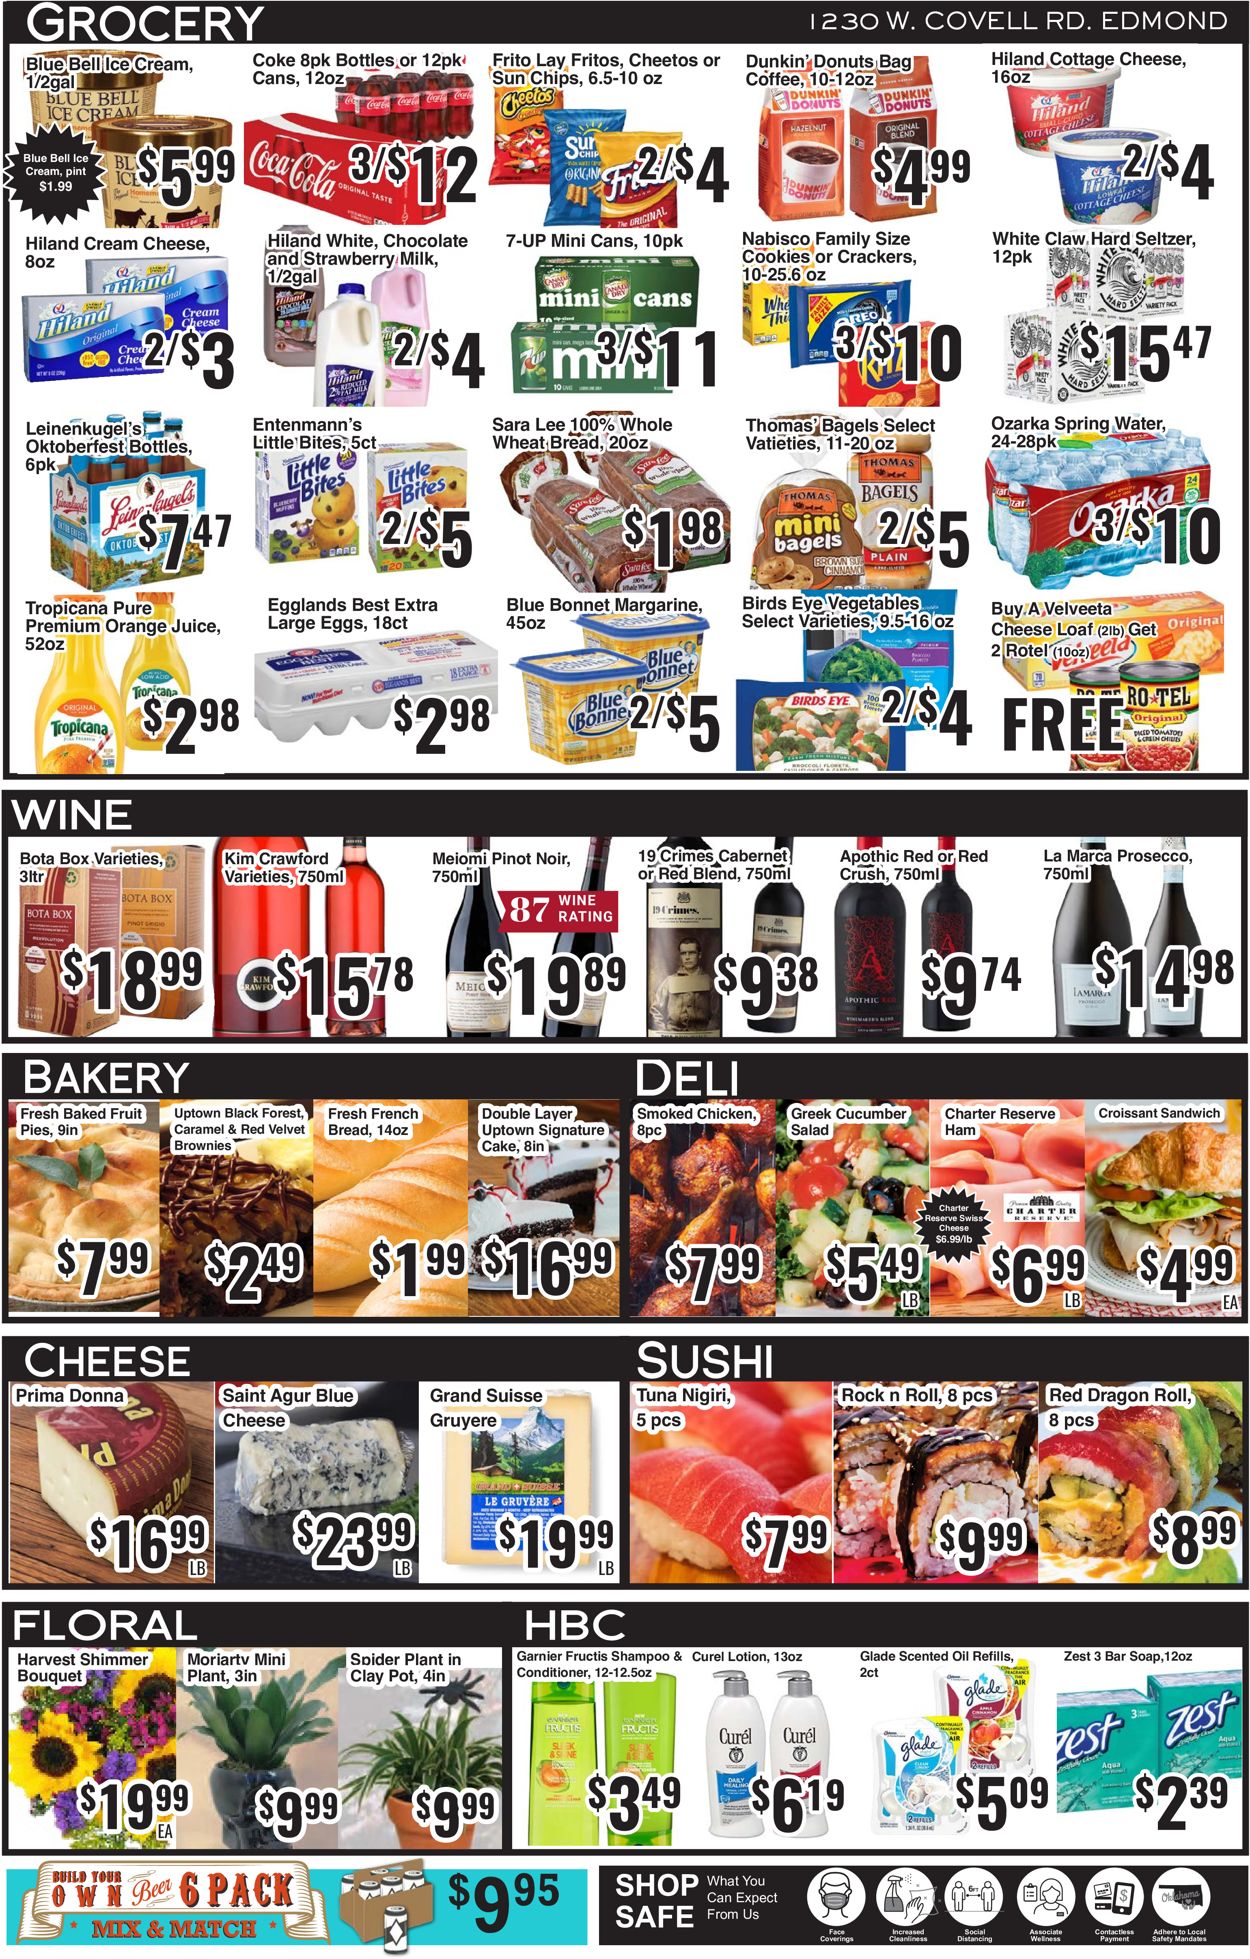 Uptown Grocery Co. Weekly Ad Circular - valid 10/14-10/20/2020 (Page 2)